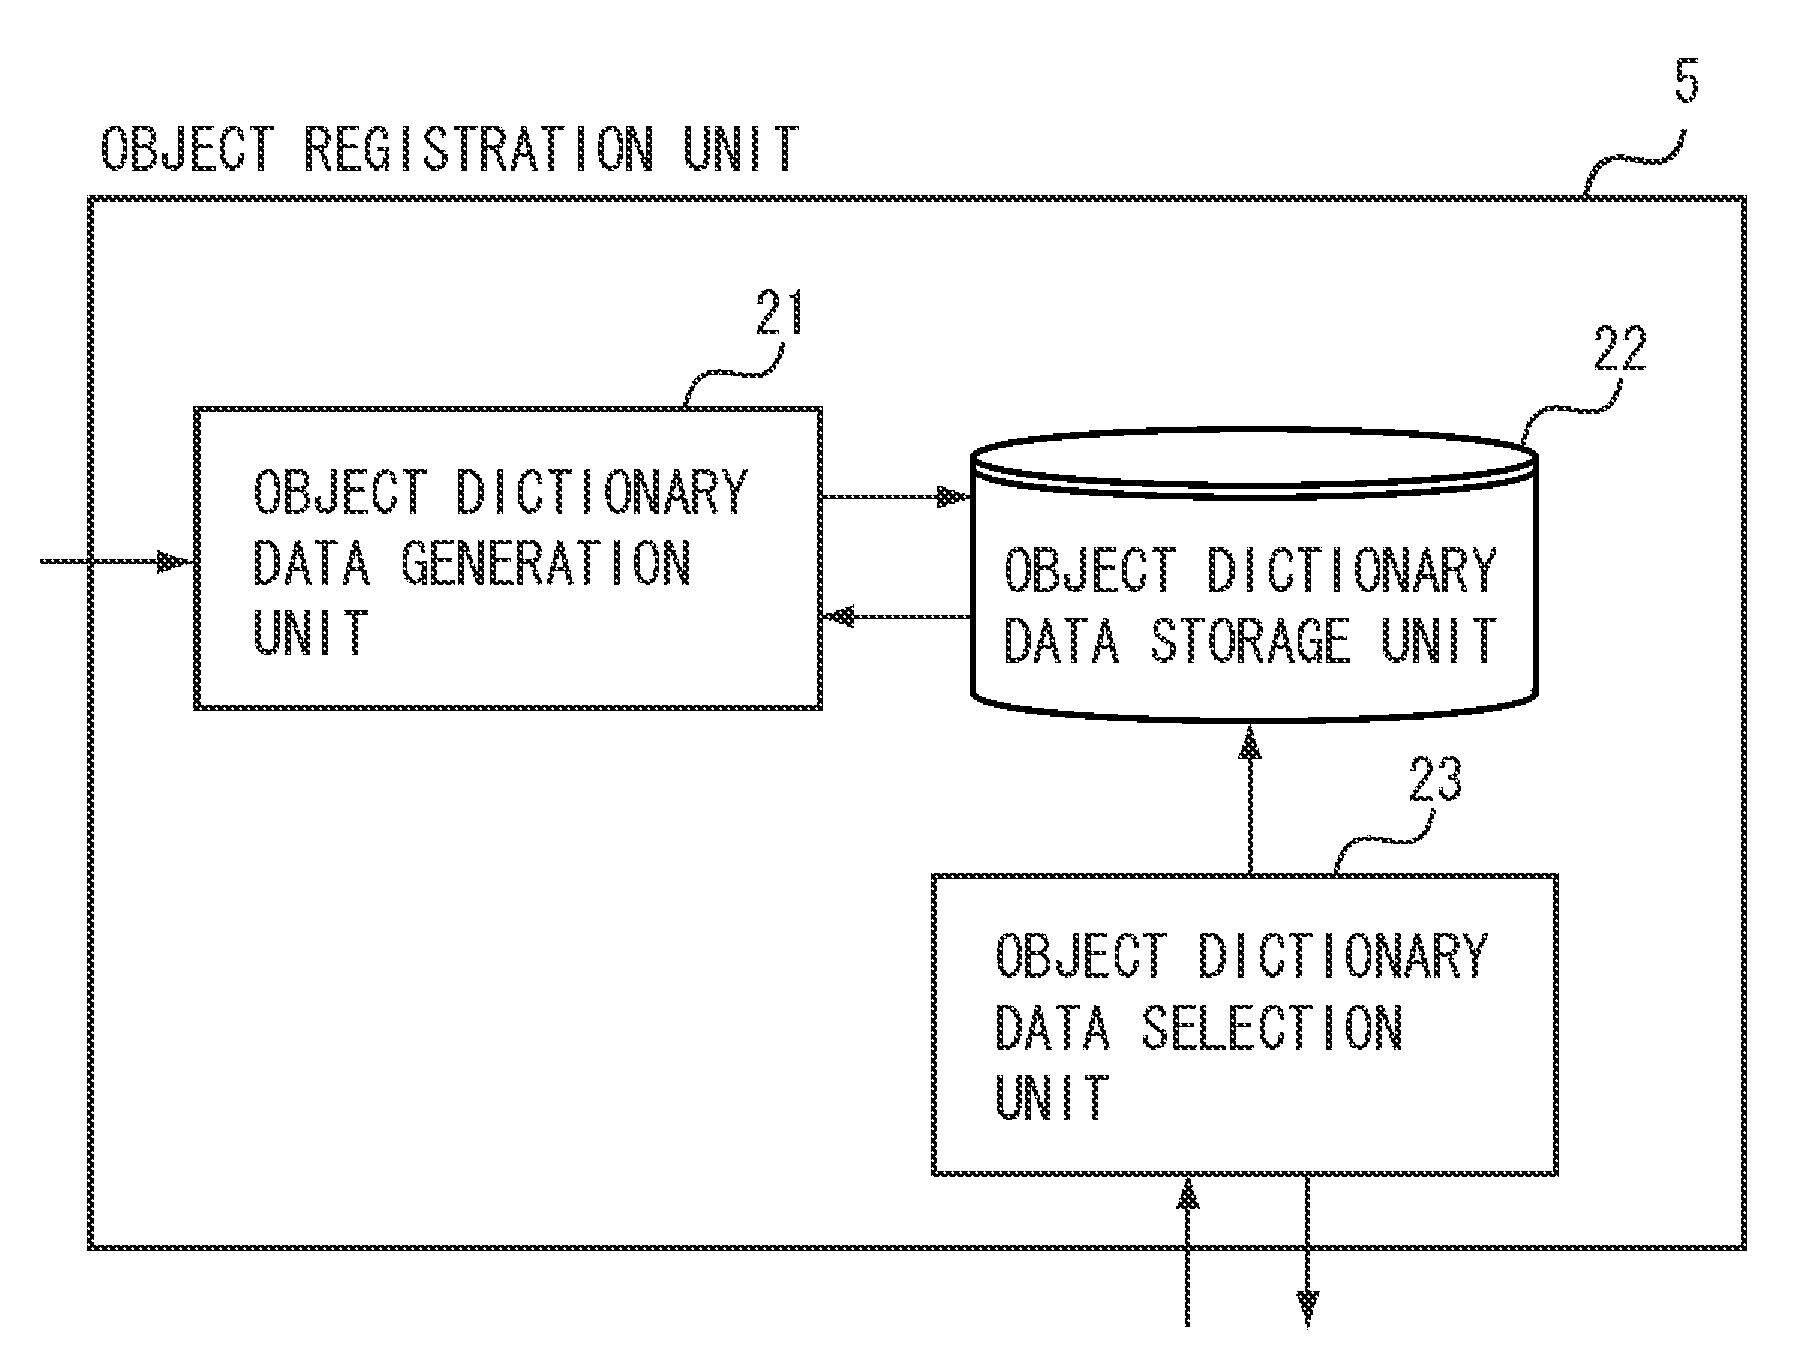 Object identification apparatus and method for identifying object